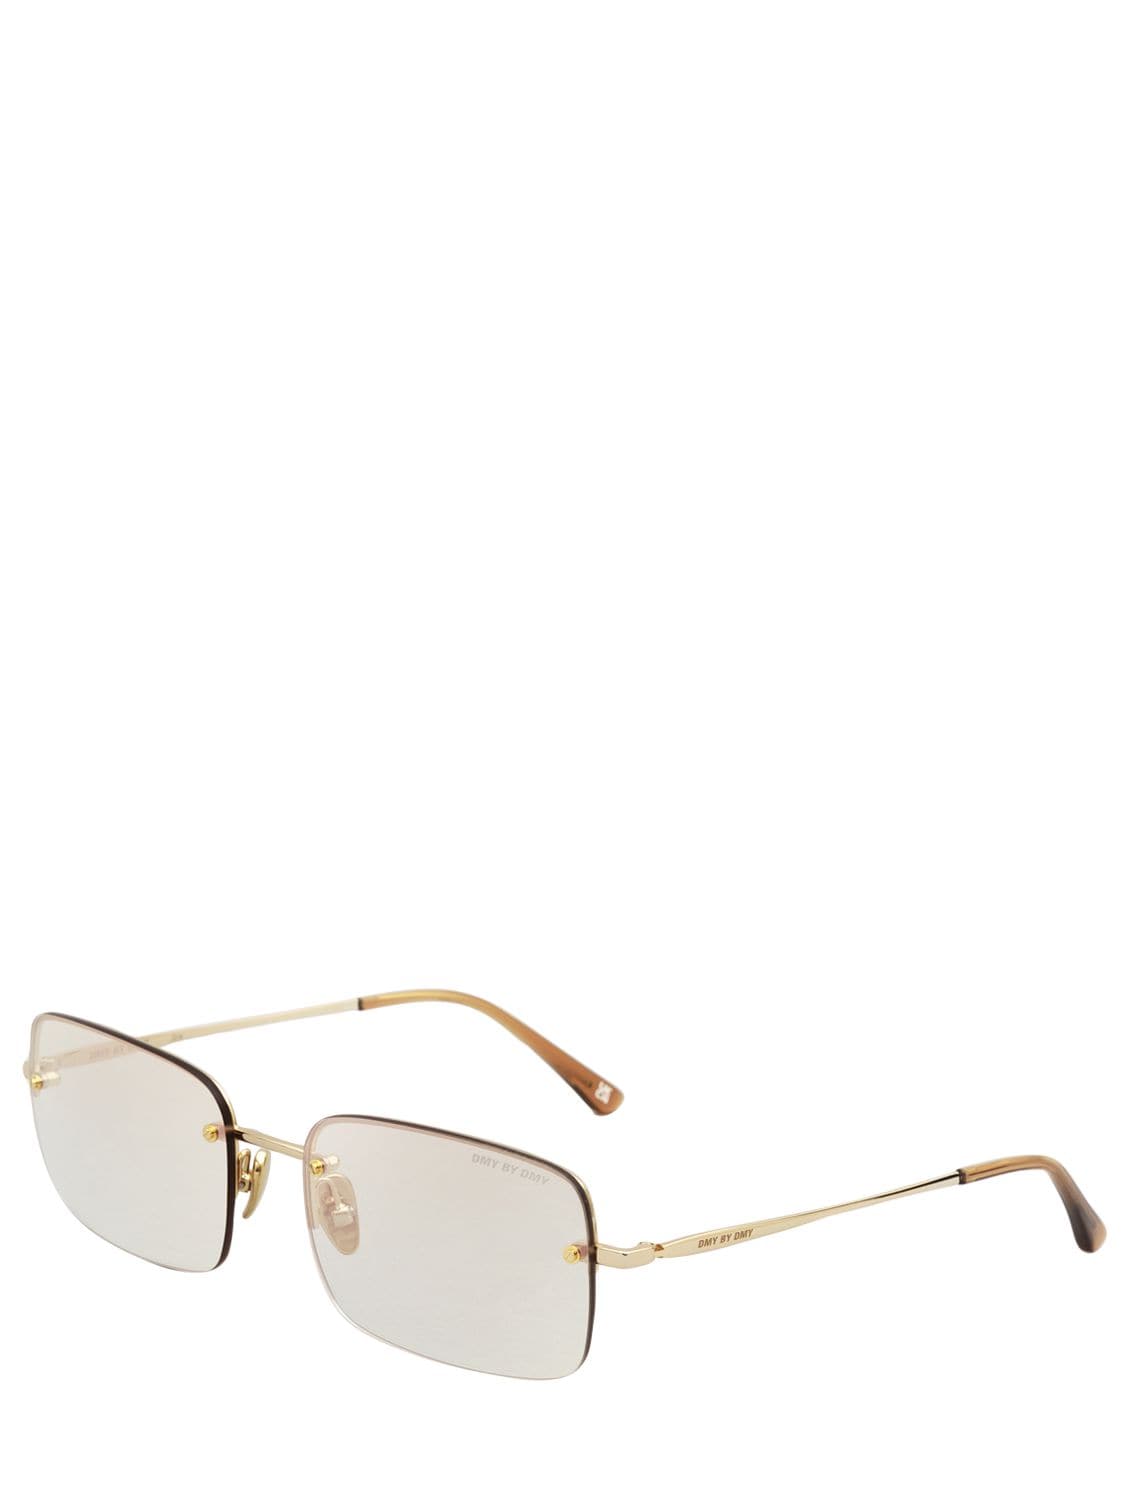 Shop Dmy By Dmy Jen Squared Stainless Steel Sunglasses In Gold,mirror